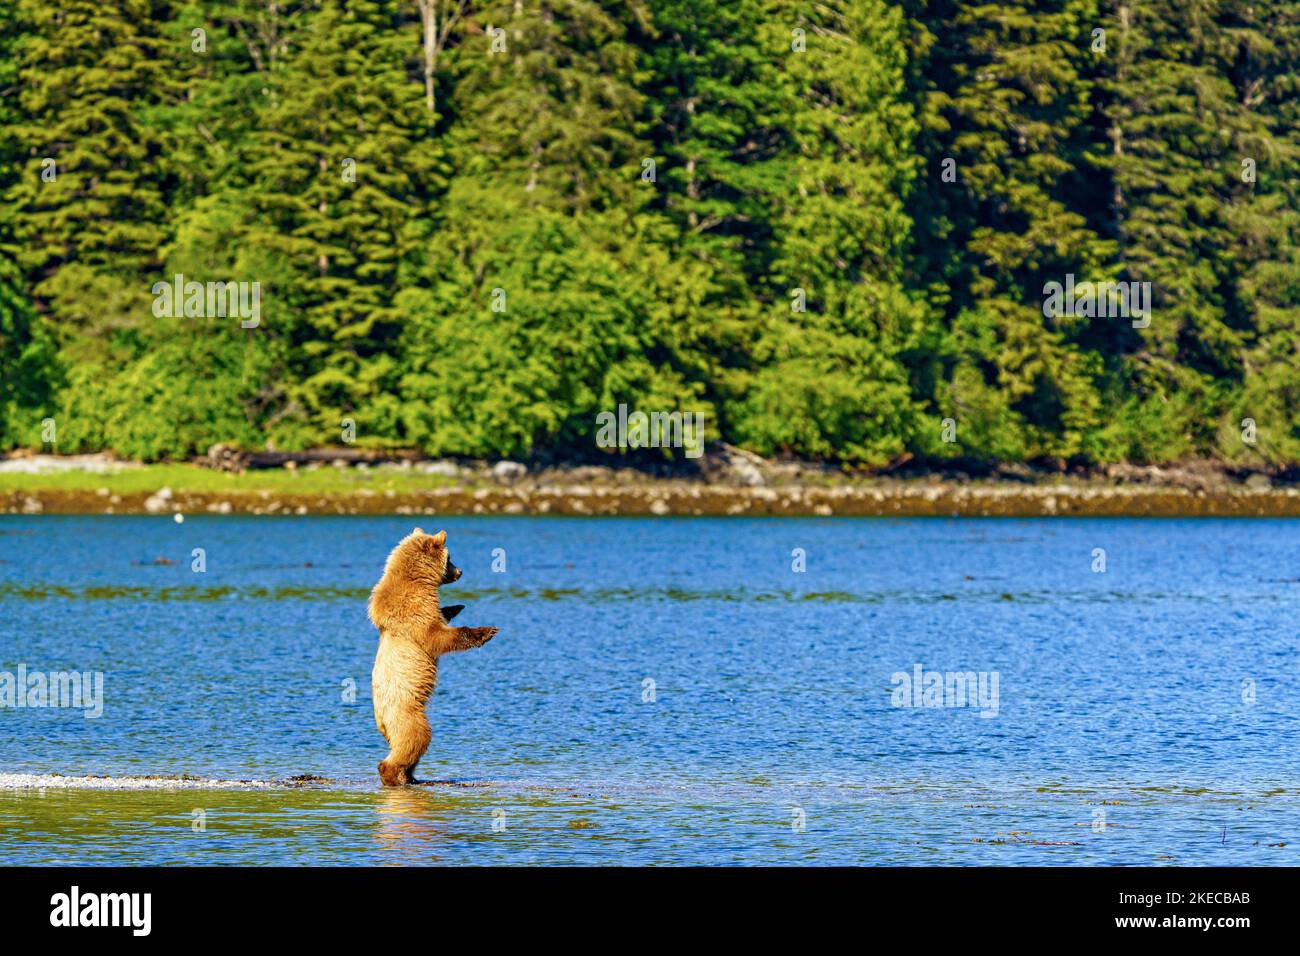 1. 5-year-old grizzly bear cub chasing shadows along the shoreline of Knight Inlet, First Nations Territory, Traditional Territories of the Kwakwaka' Stock Photo